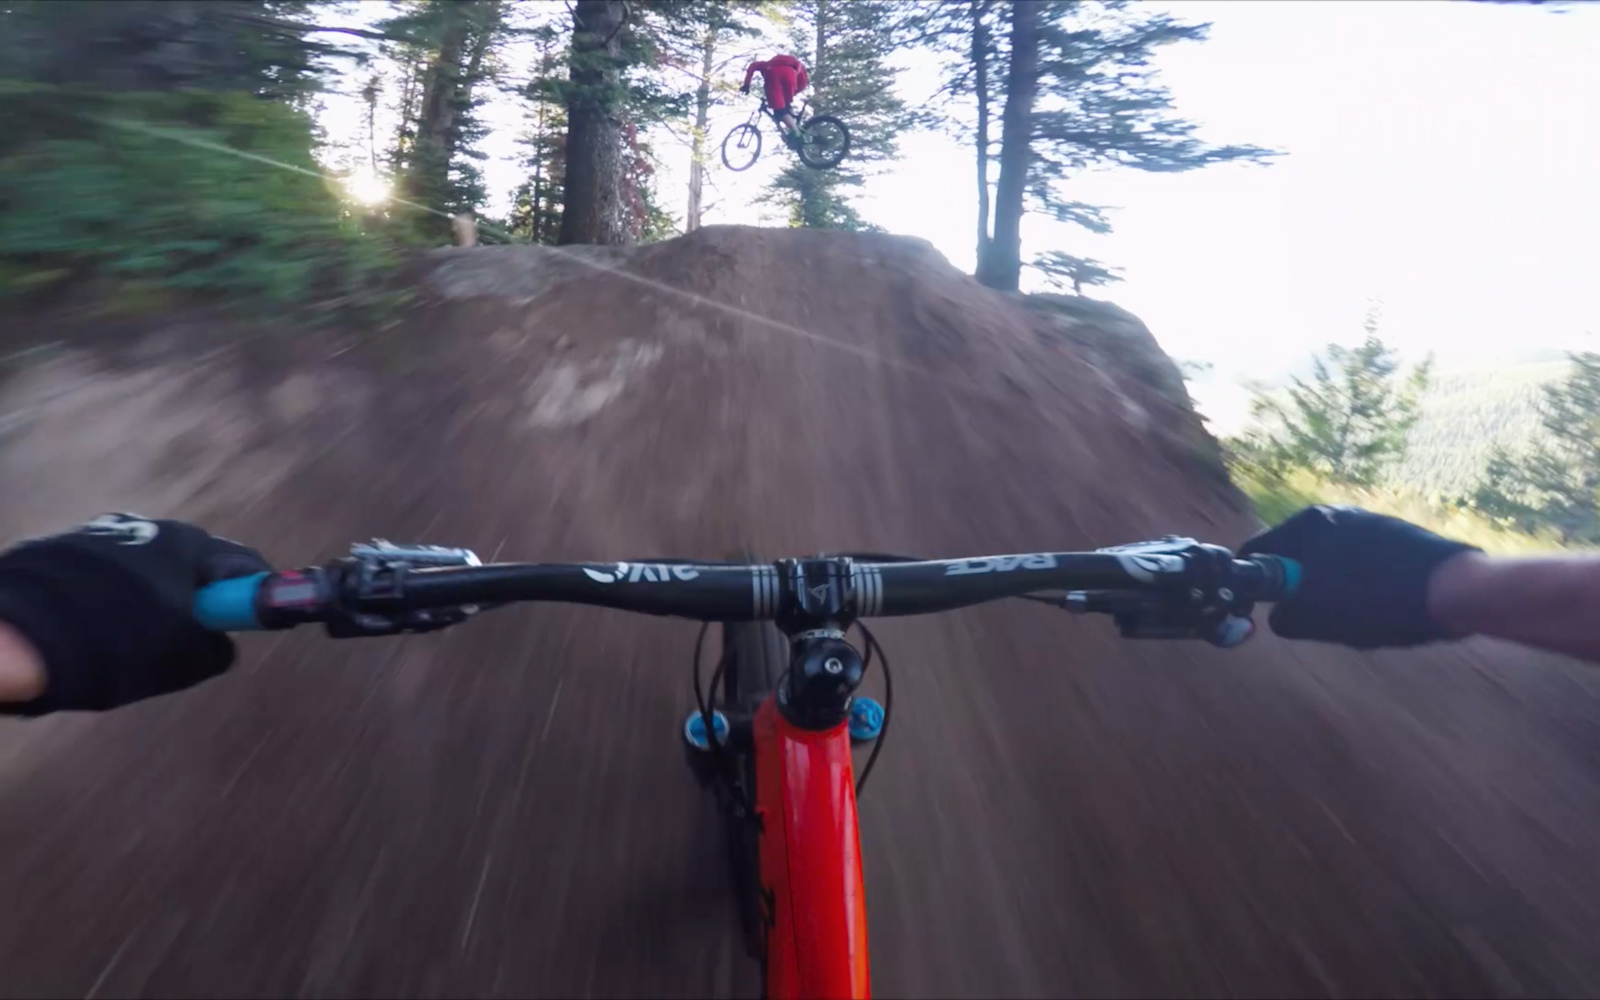 Screen grab from an early morning lap on Teton Pass, Wyoming.  I would categorize this as highly "enduro"...